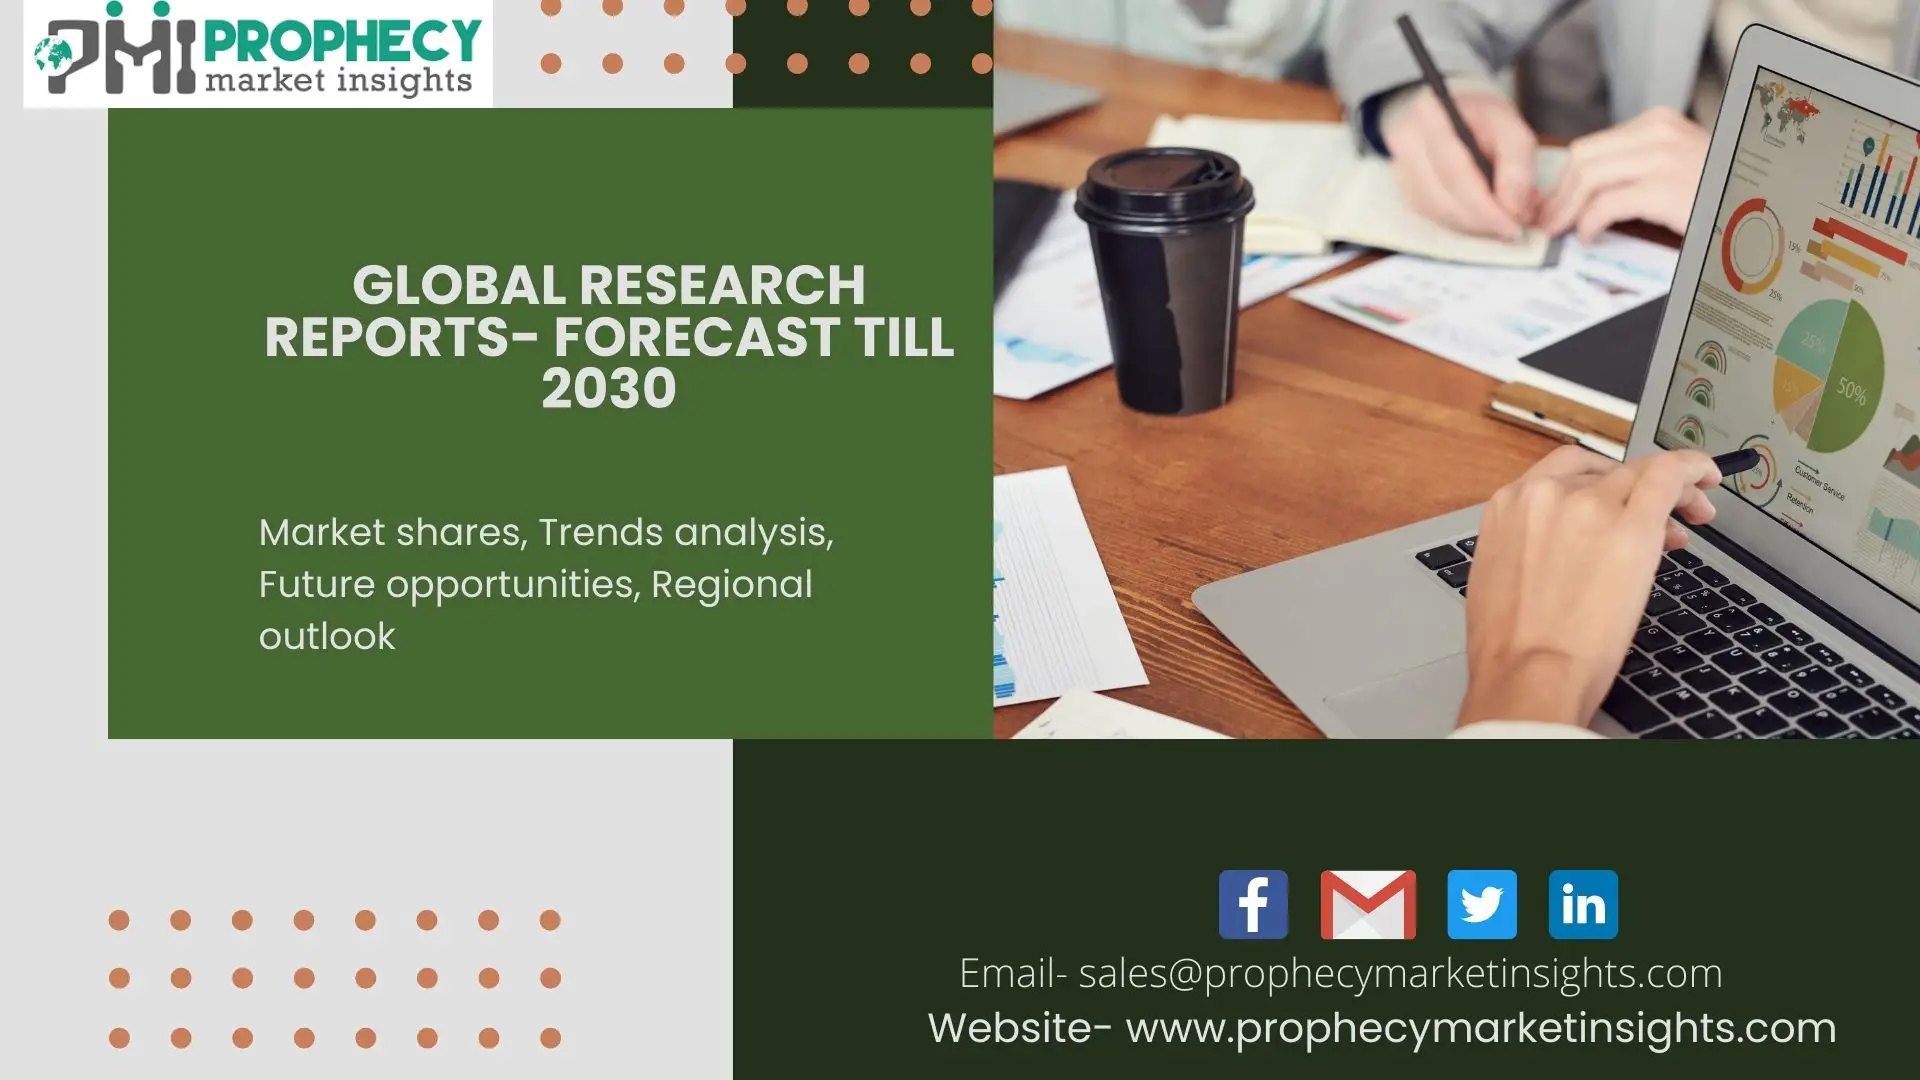 gLOBAL RESEARCH rEPORTS- fORECAST TILL 2030-bc770574